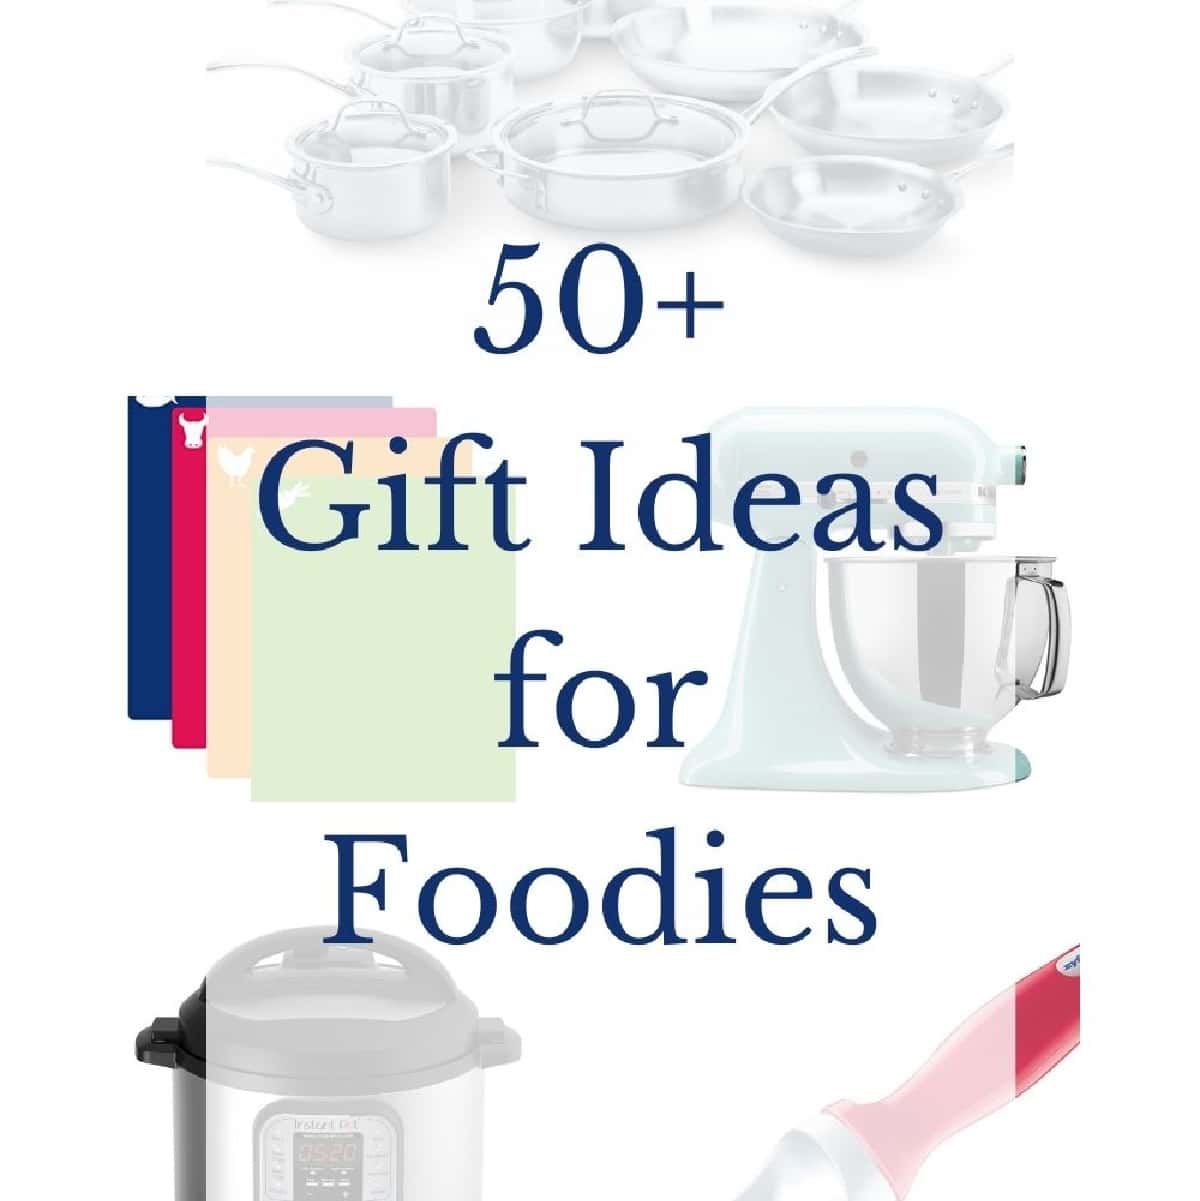 https://cookingwithcurls.com/wp-content/uploads/2015/11/50-plus-gift-ideas-for-foodies-featured-cookingwithcurls.com_.jpg